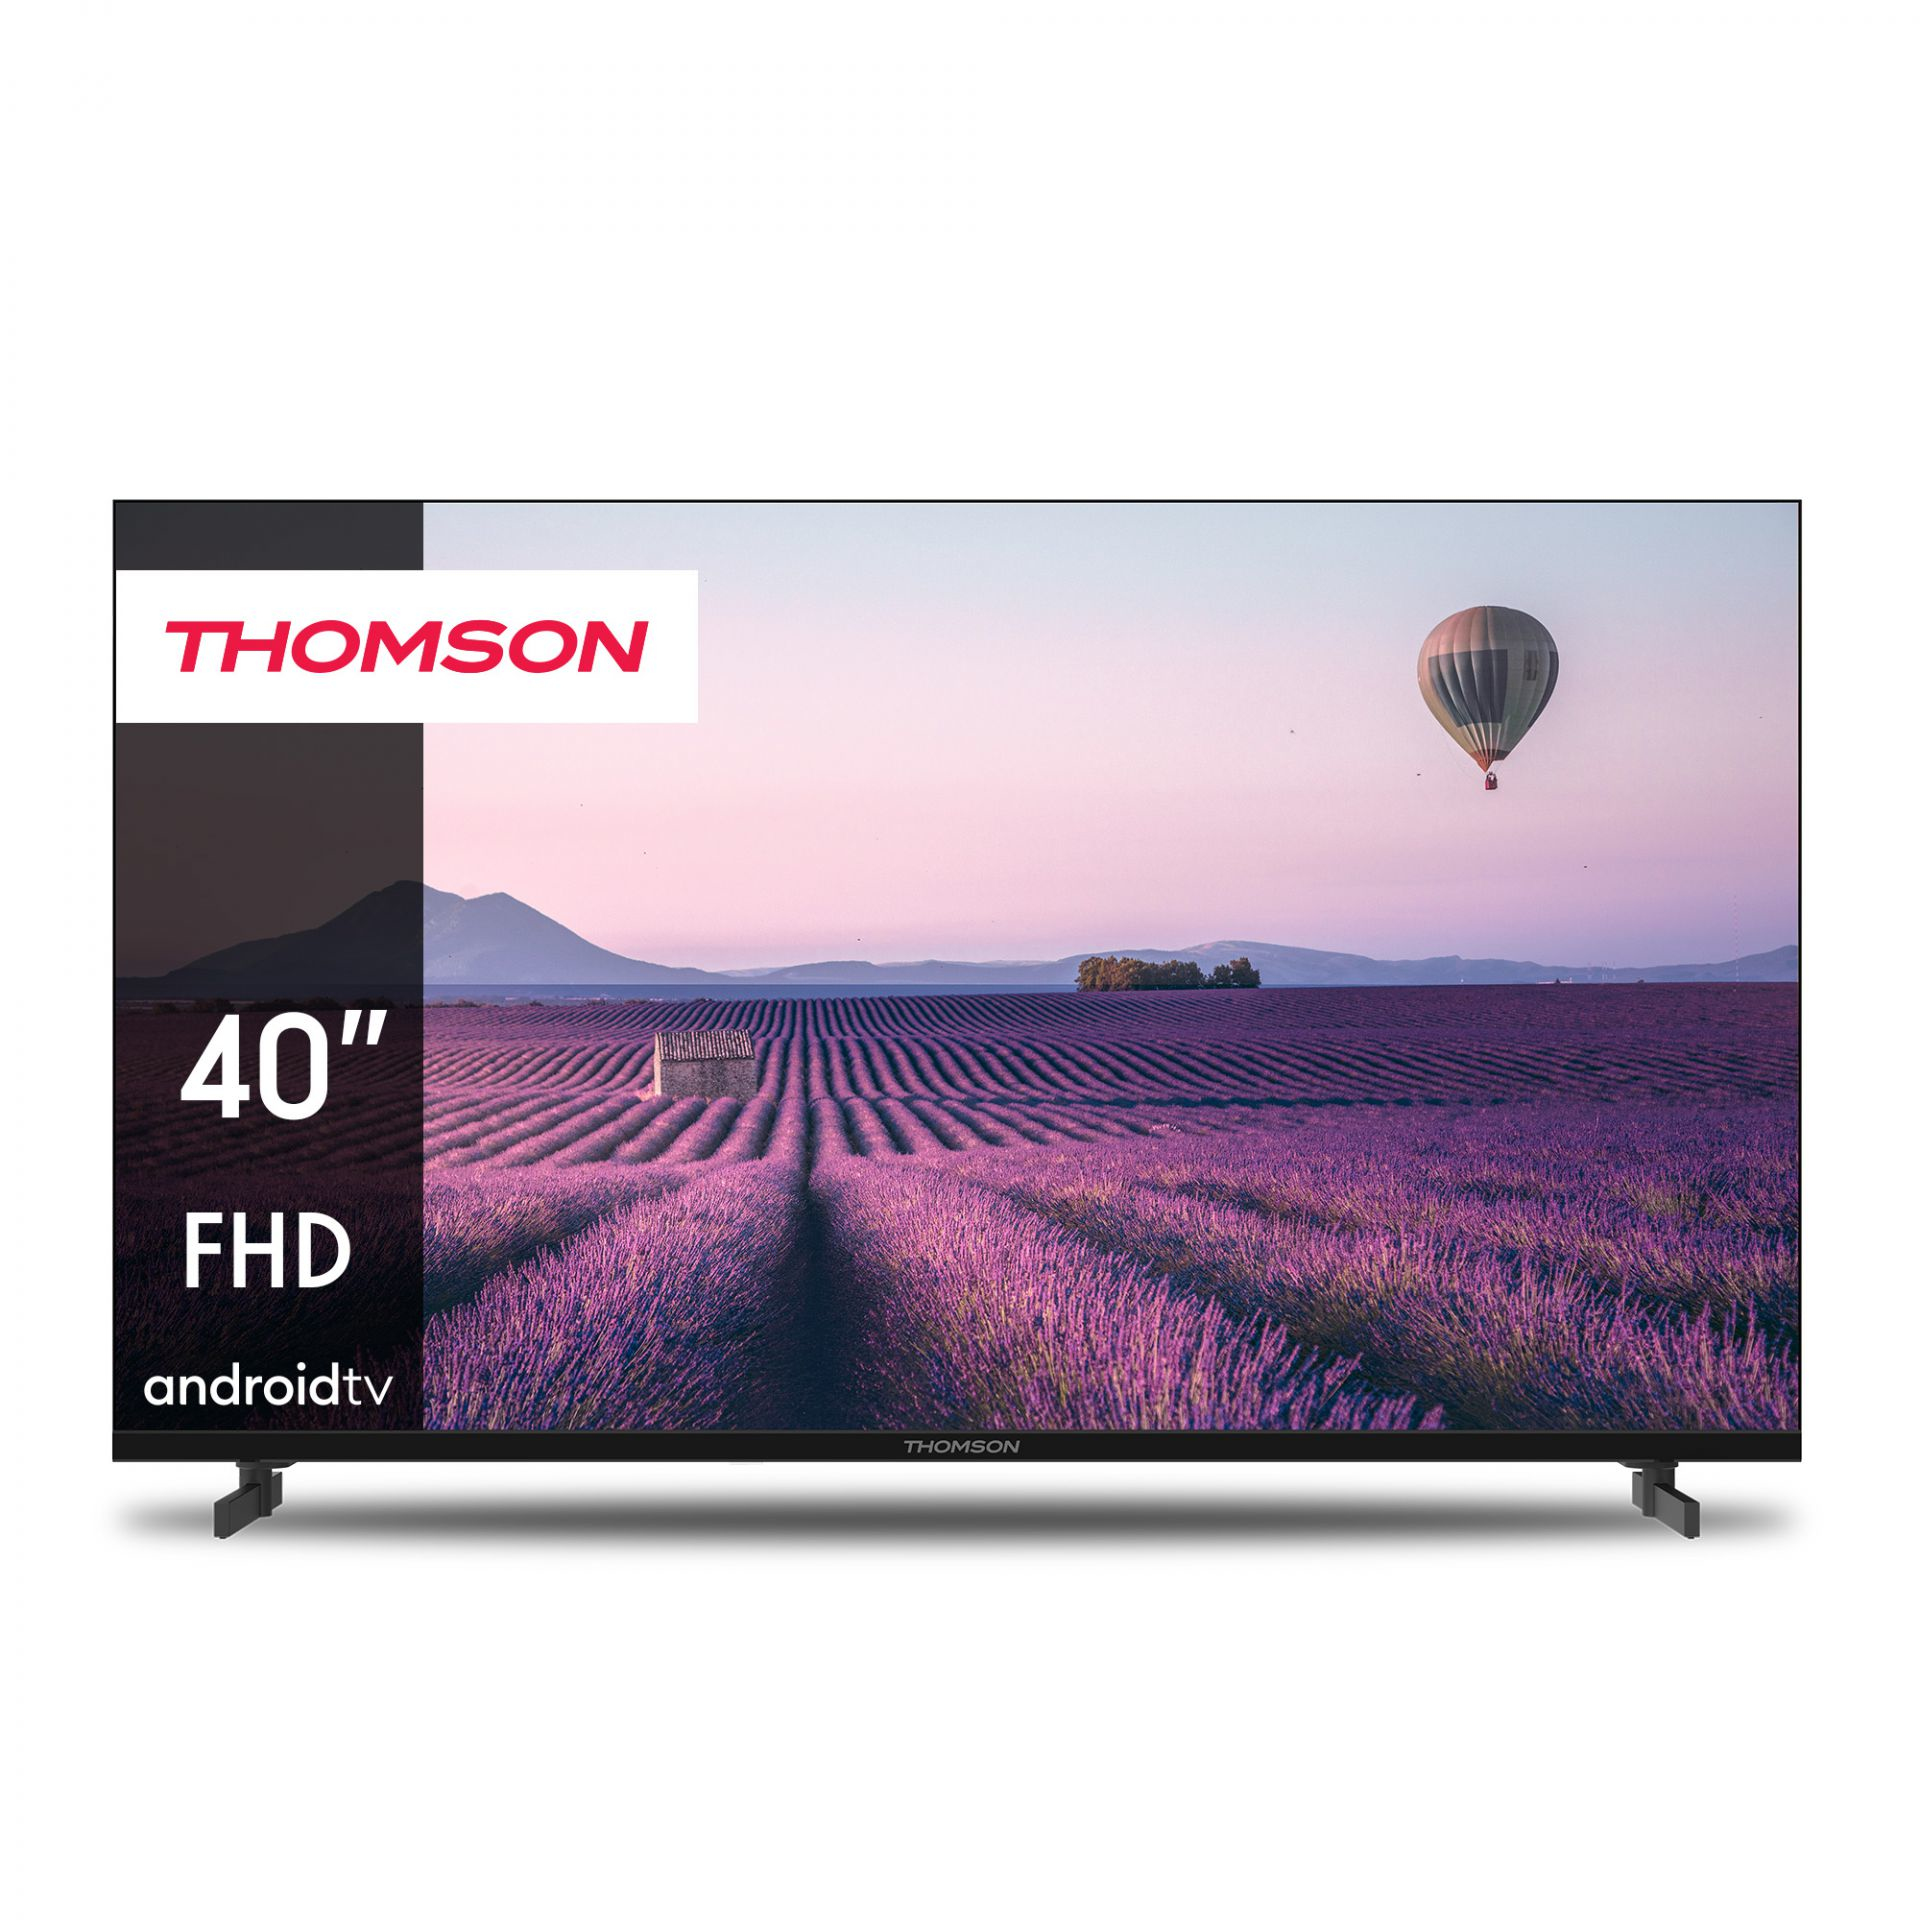 TV-40-THOMSON-FHD-FRAMELESS-SMART-T2/C2S2-ANDROID-11